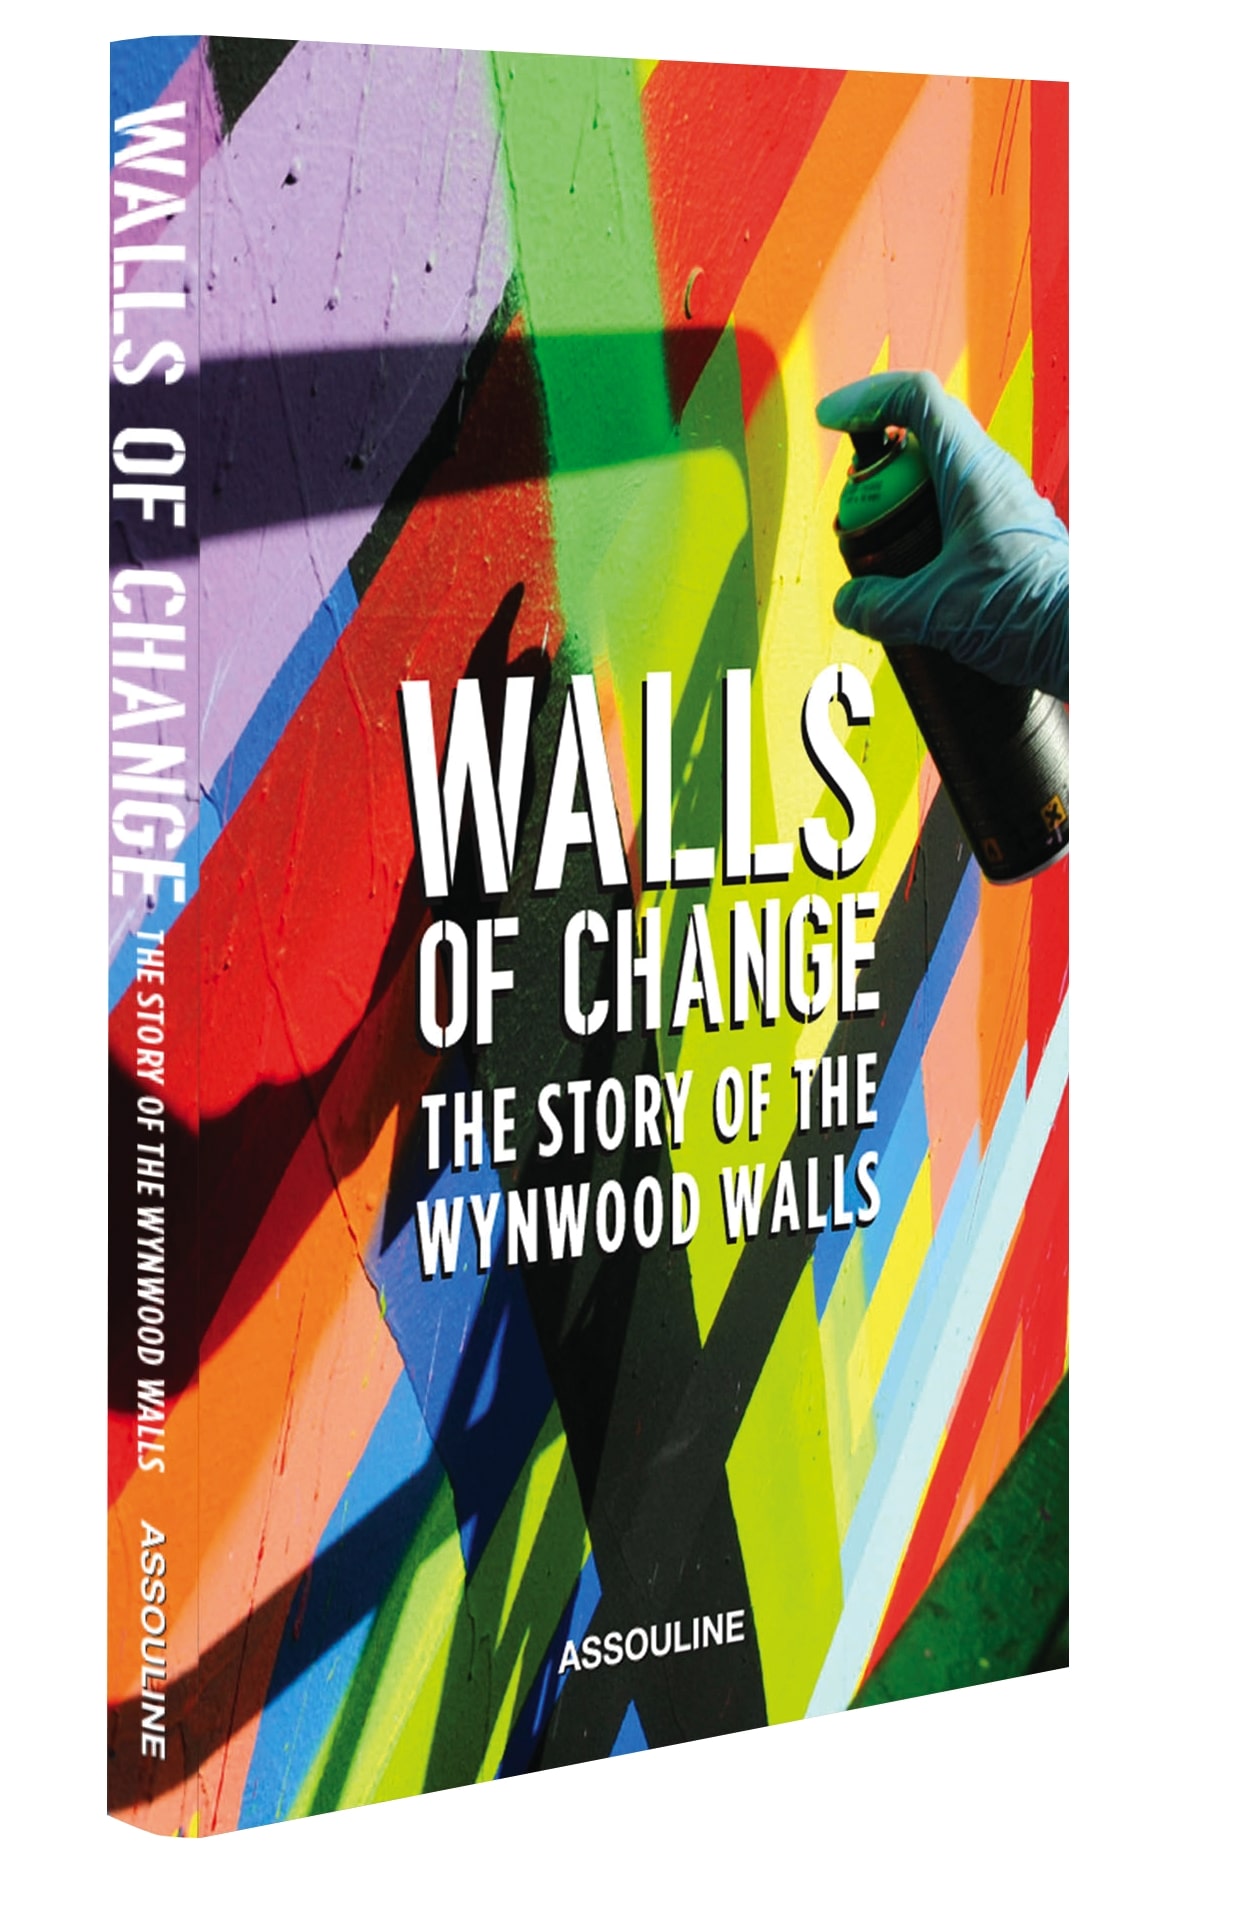 Walls_Of_Change_The_Story_Of_The_Wynwood_Wall_3D_Cover_Rendering.jpg